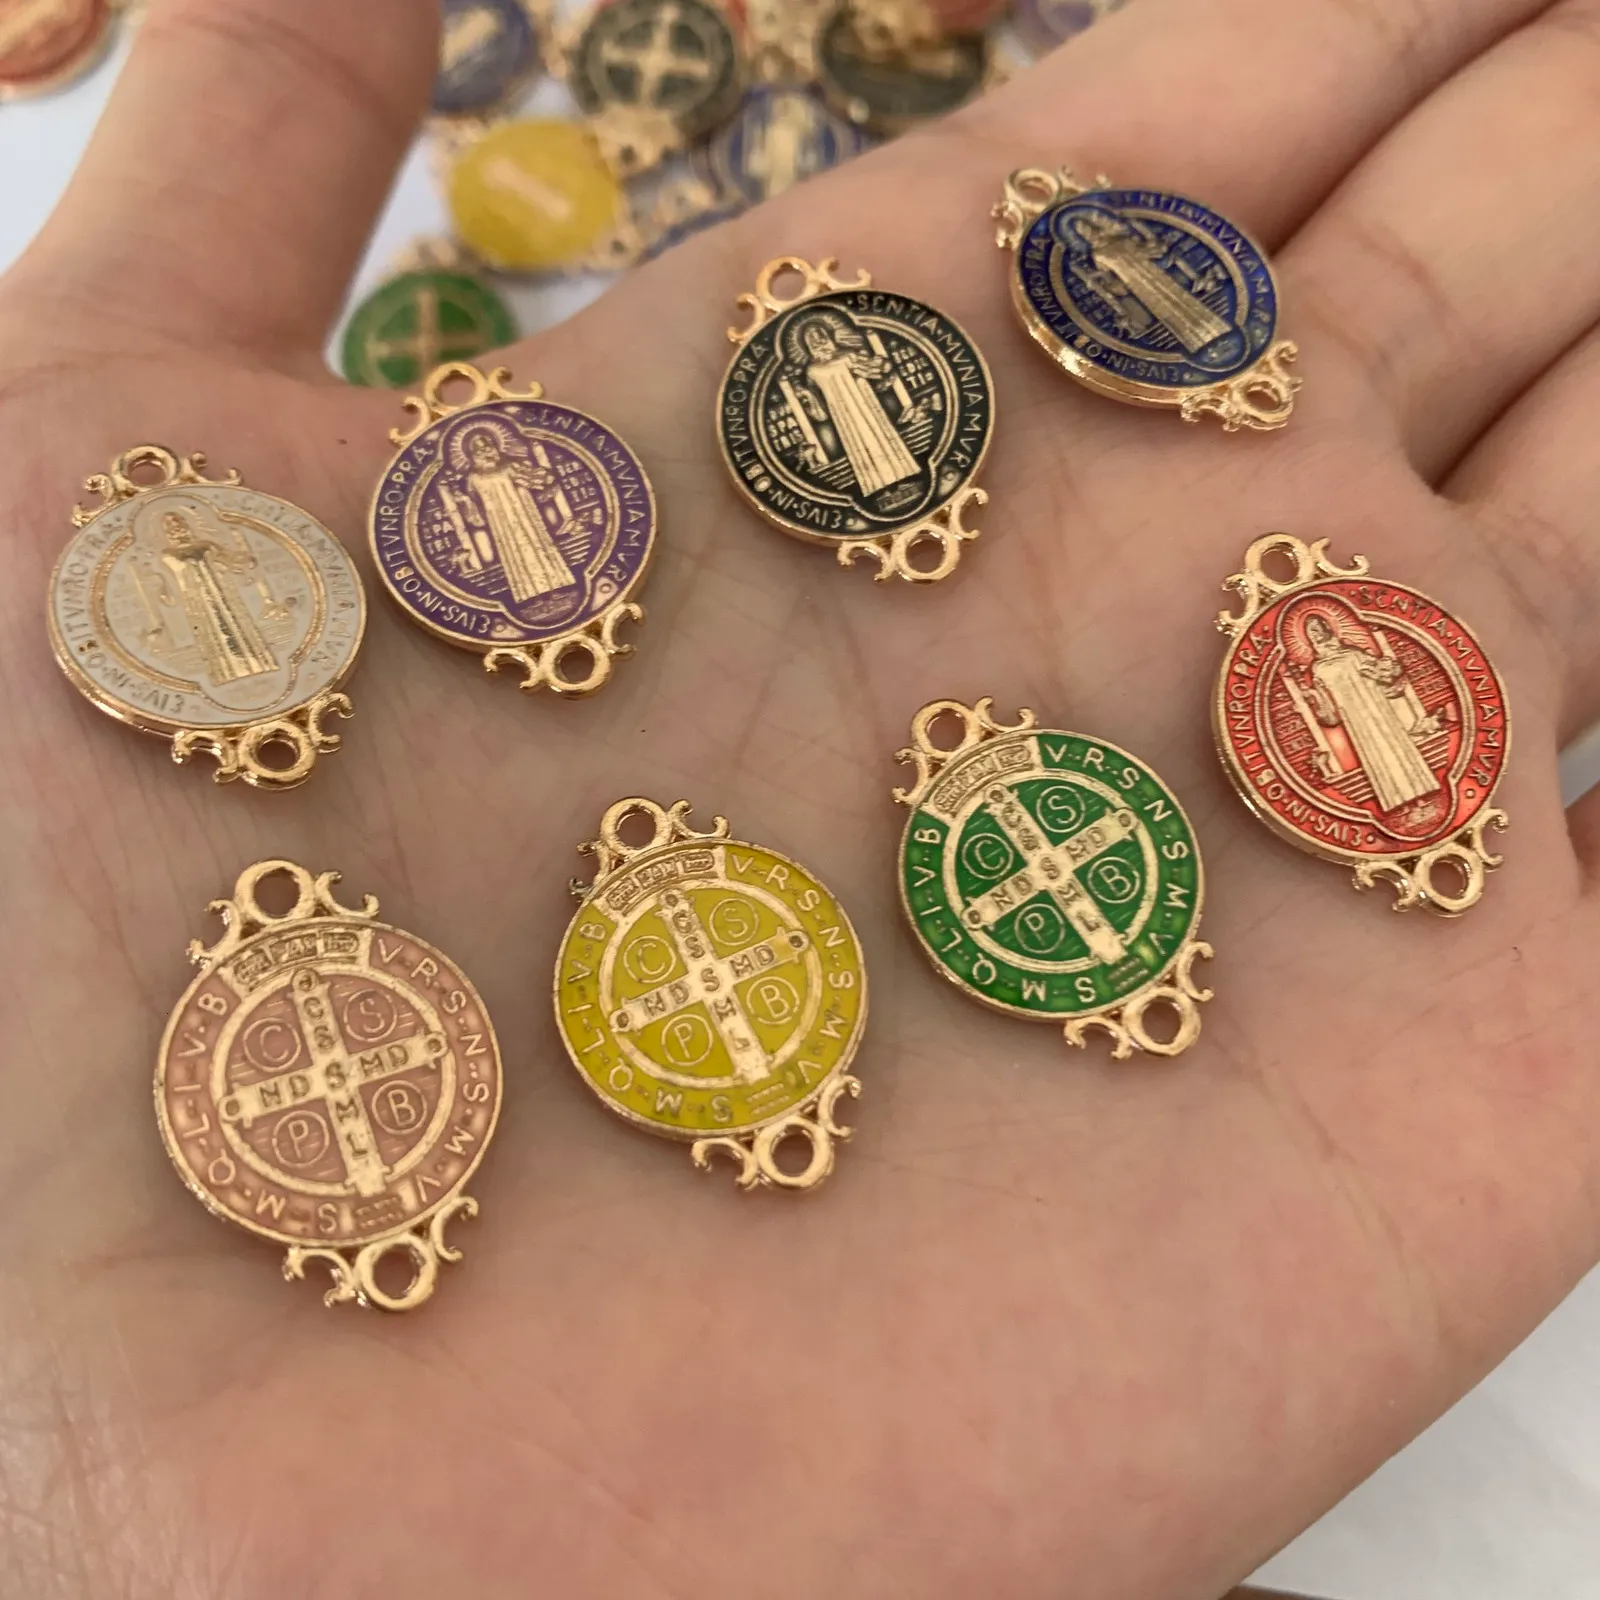 Charms 50PcsSaint Benedict Medal Double Sided Catholic Medals Favor Gifts Religious Charm Connector Bead Set of Multicolor Lace Pendant 230907